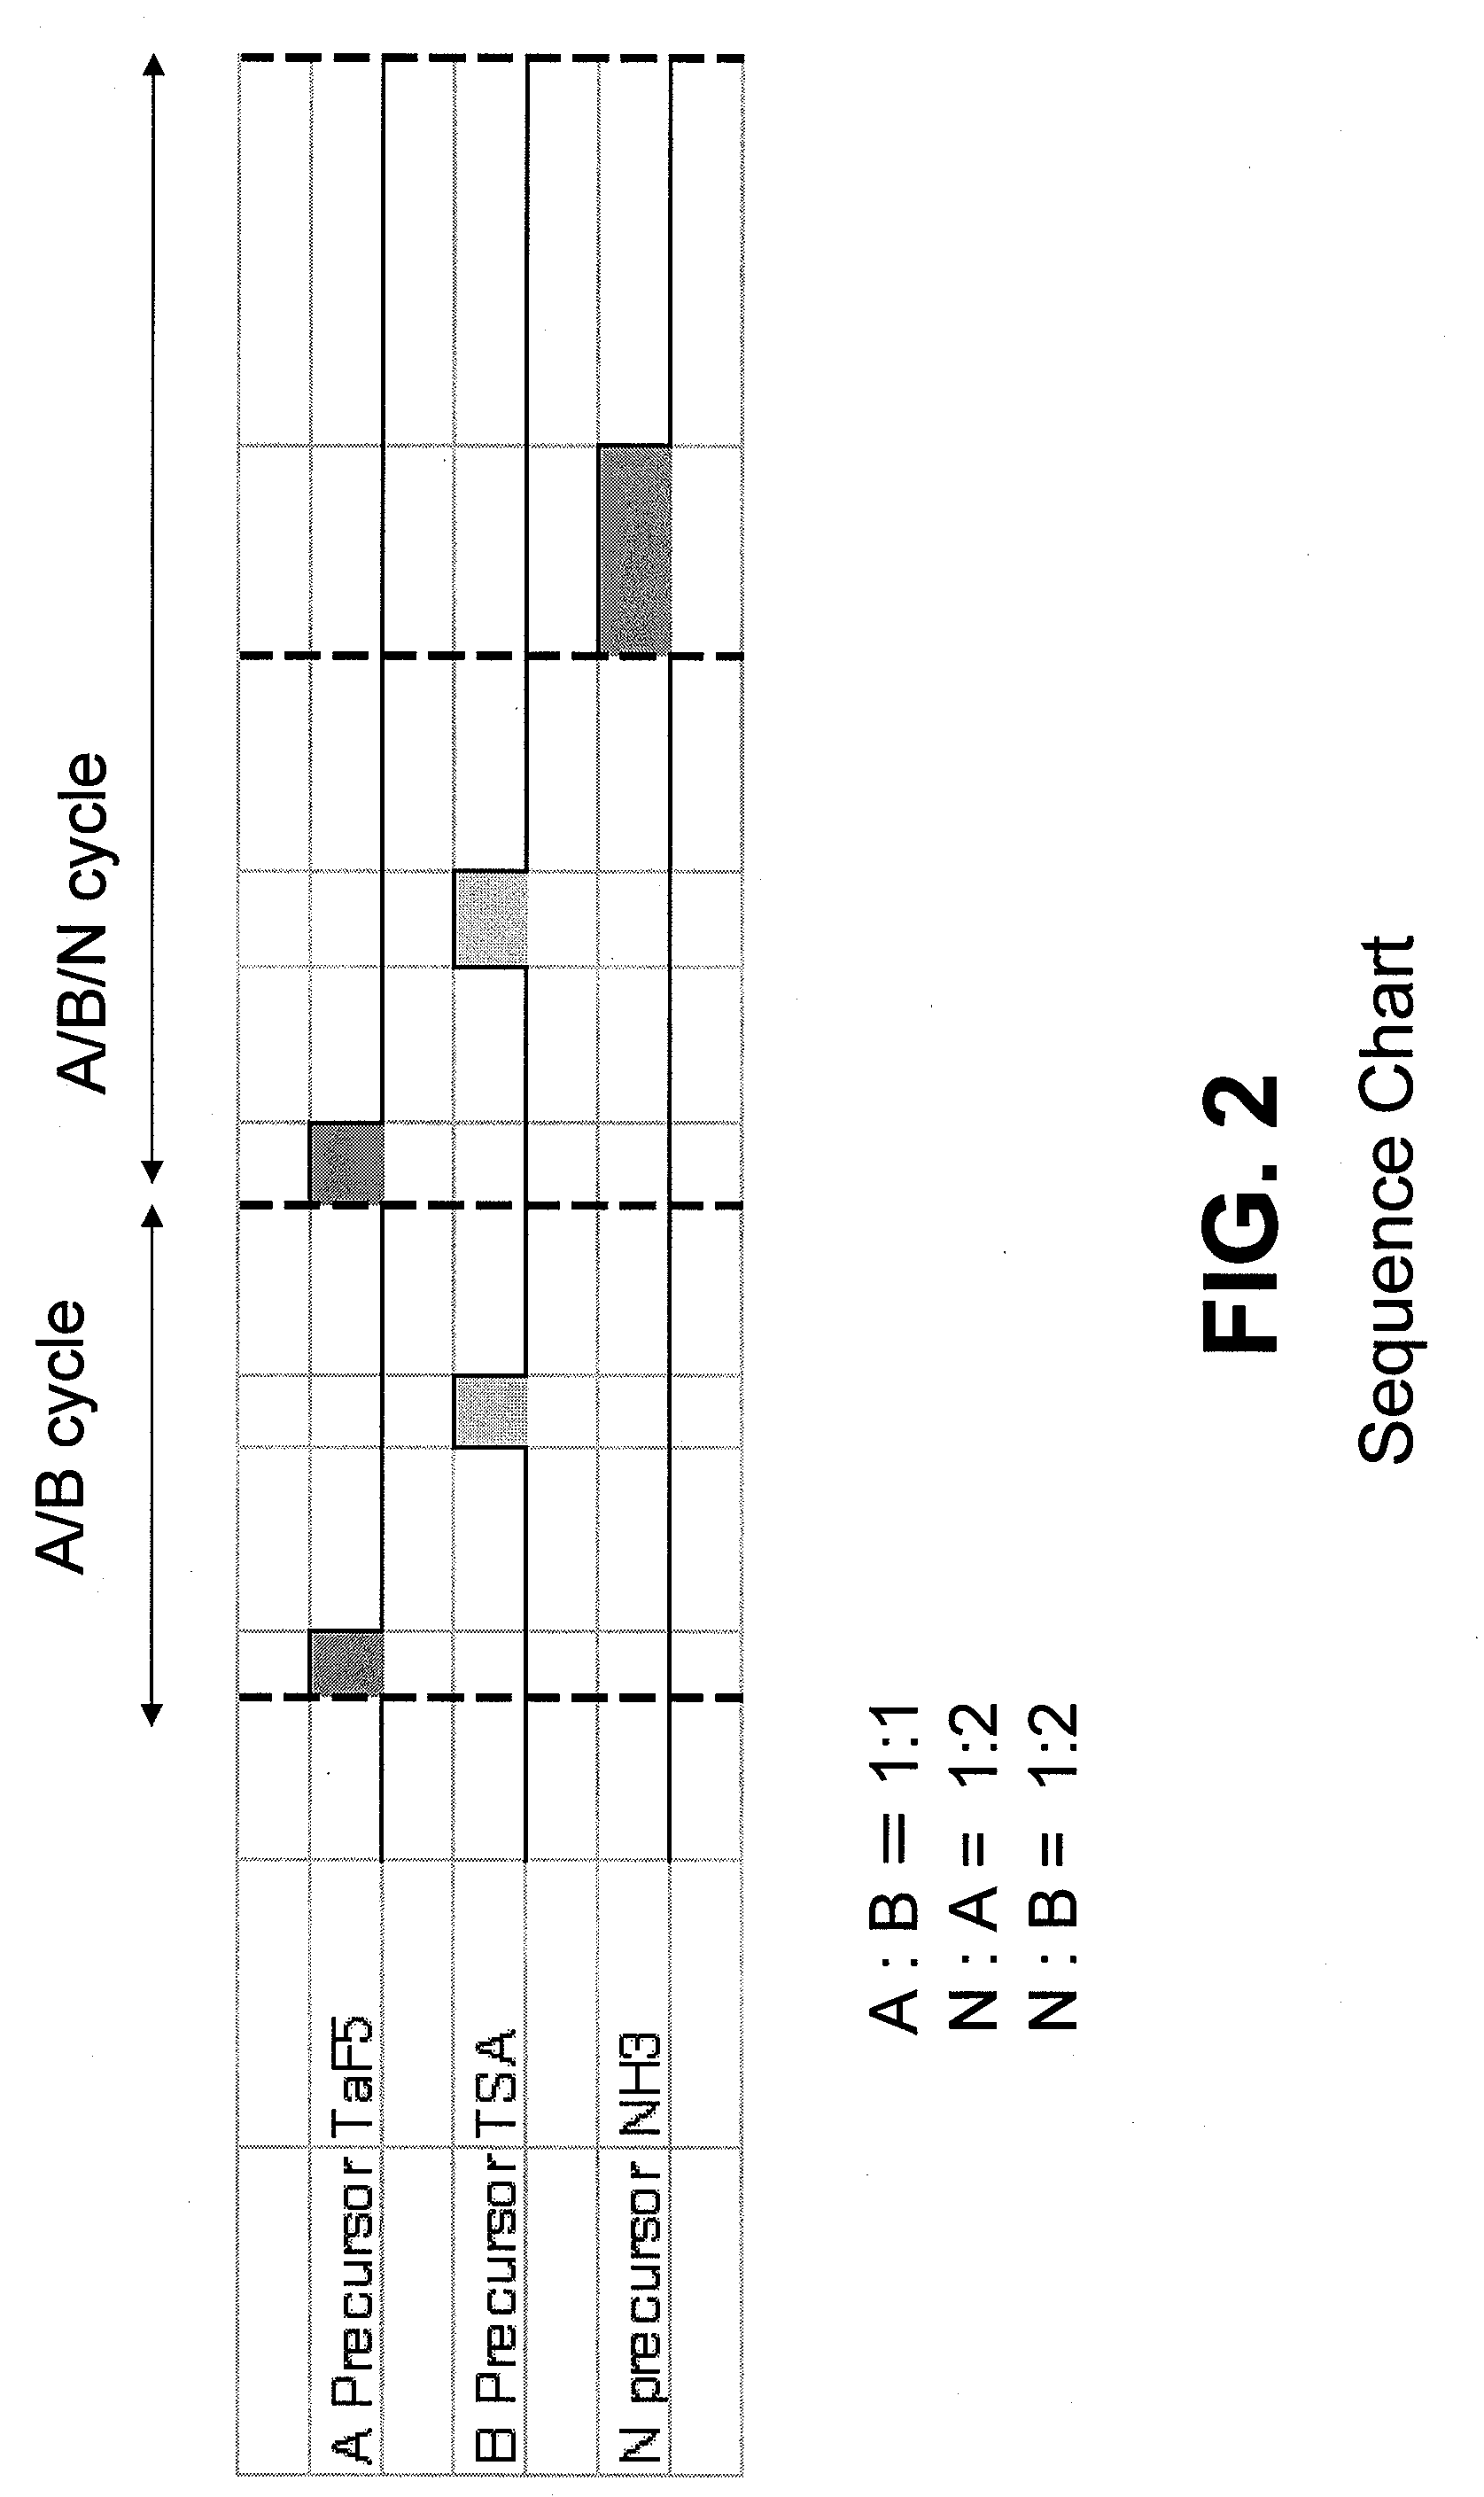 Process for forming high resistivity thin metallic film